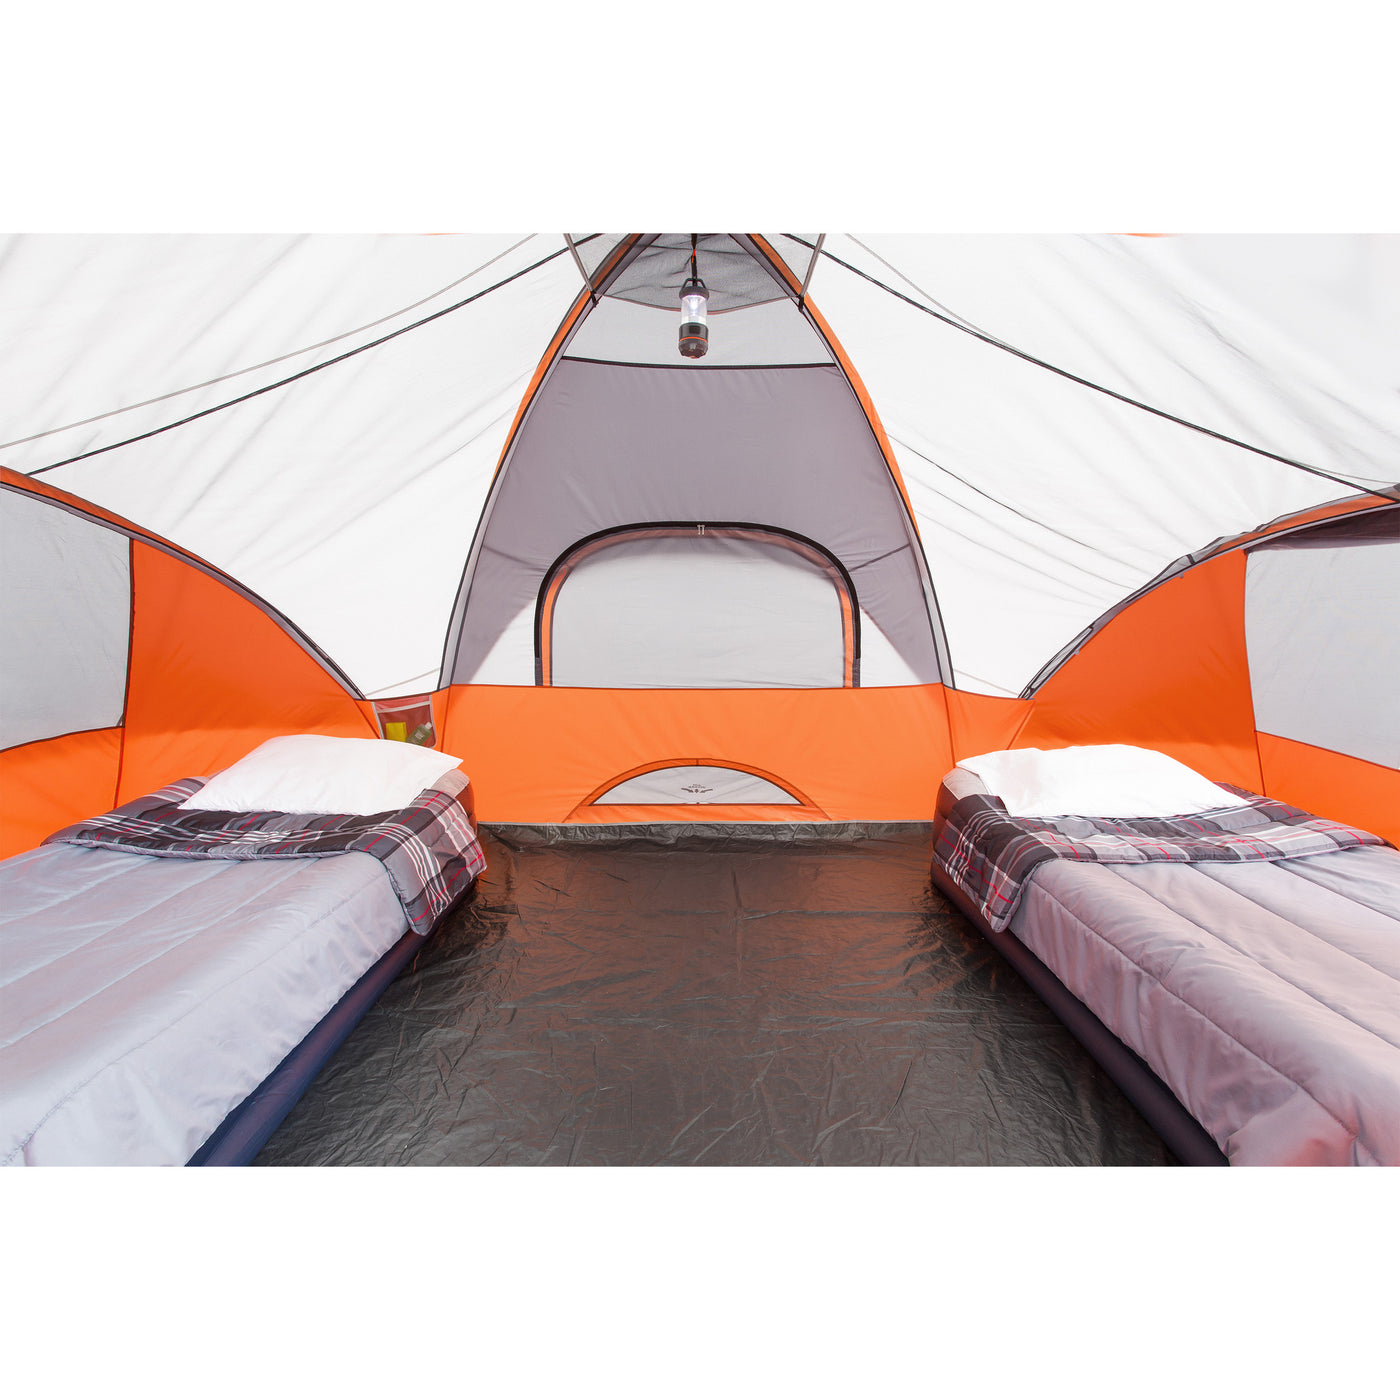 Core Equipment 9 Person Extended Dome Tent Interior with two cots and lantern hanging from gear loft